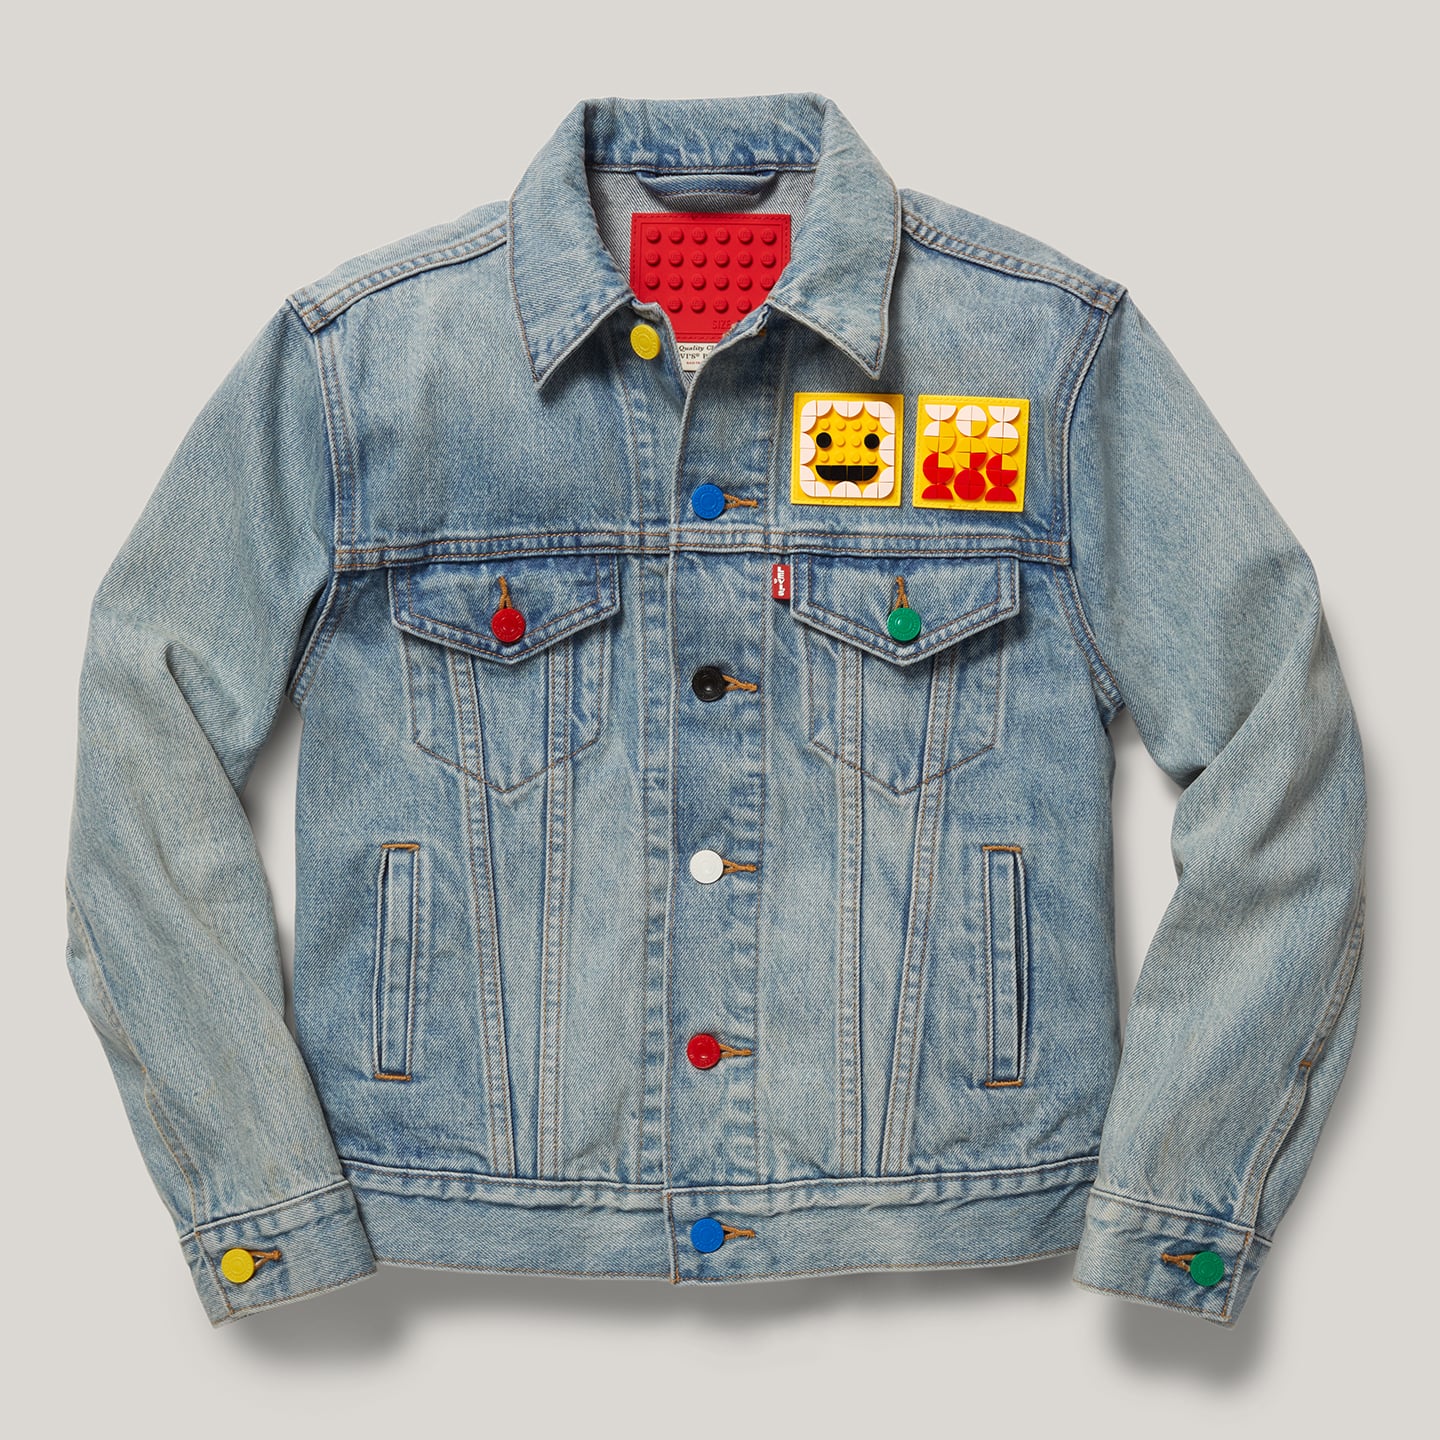 Lego x Levi's Limited-Edition Collection Coming October 1 | POPSUGAR Fashion